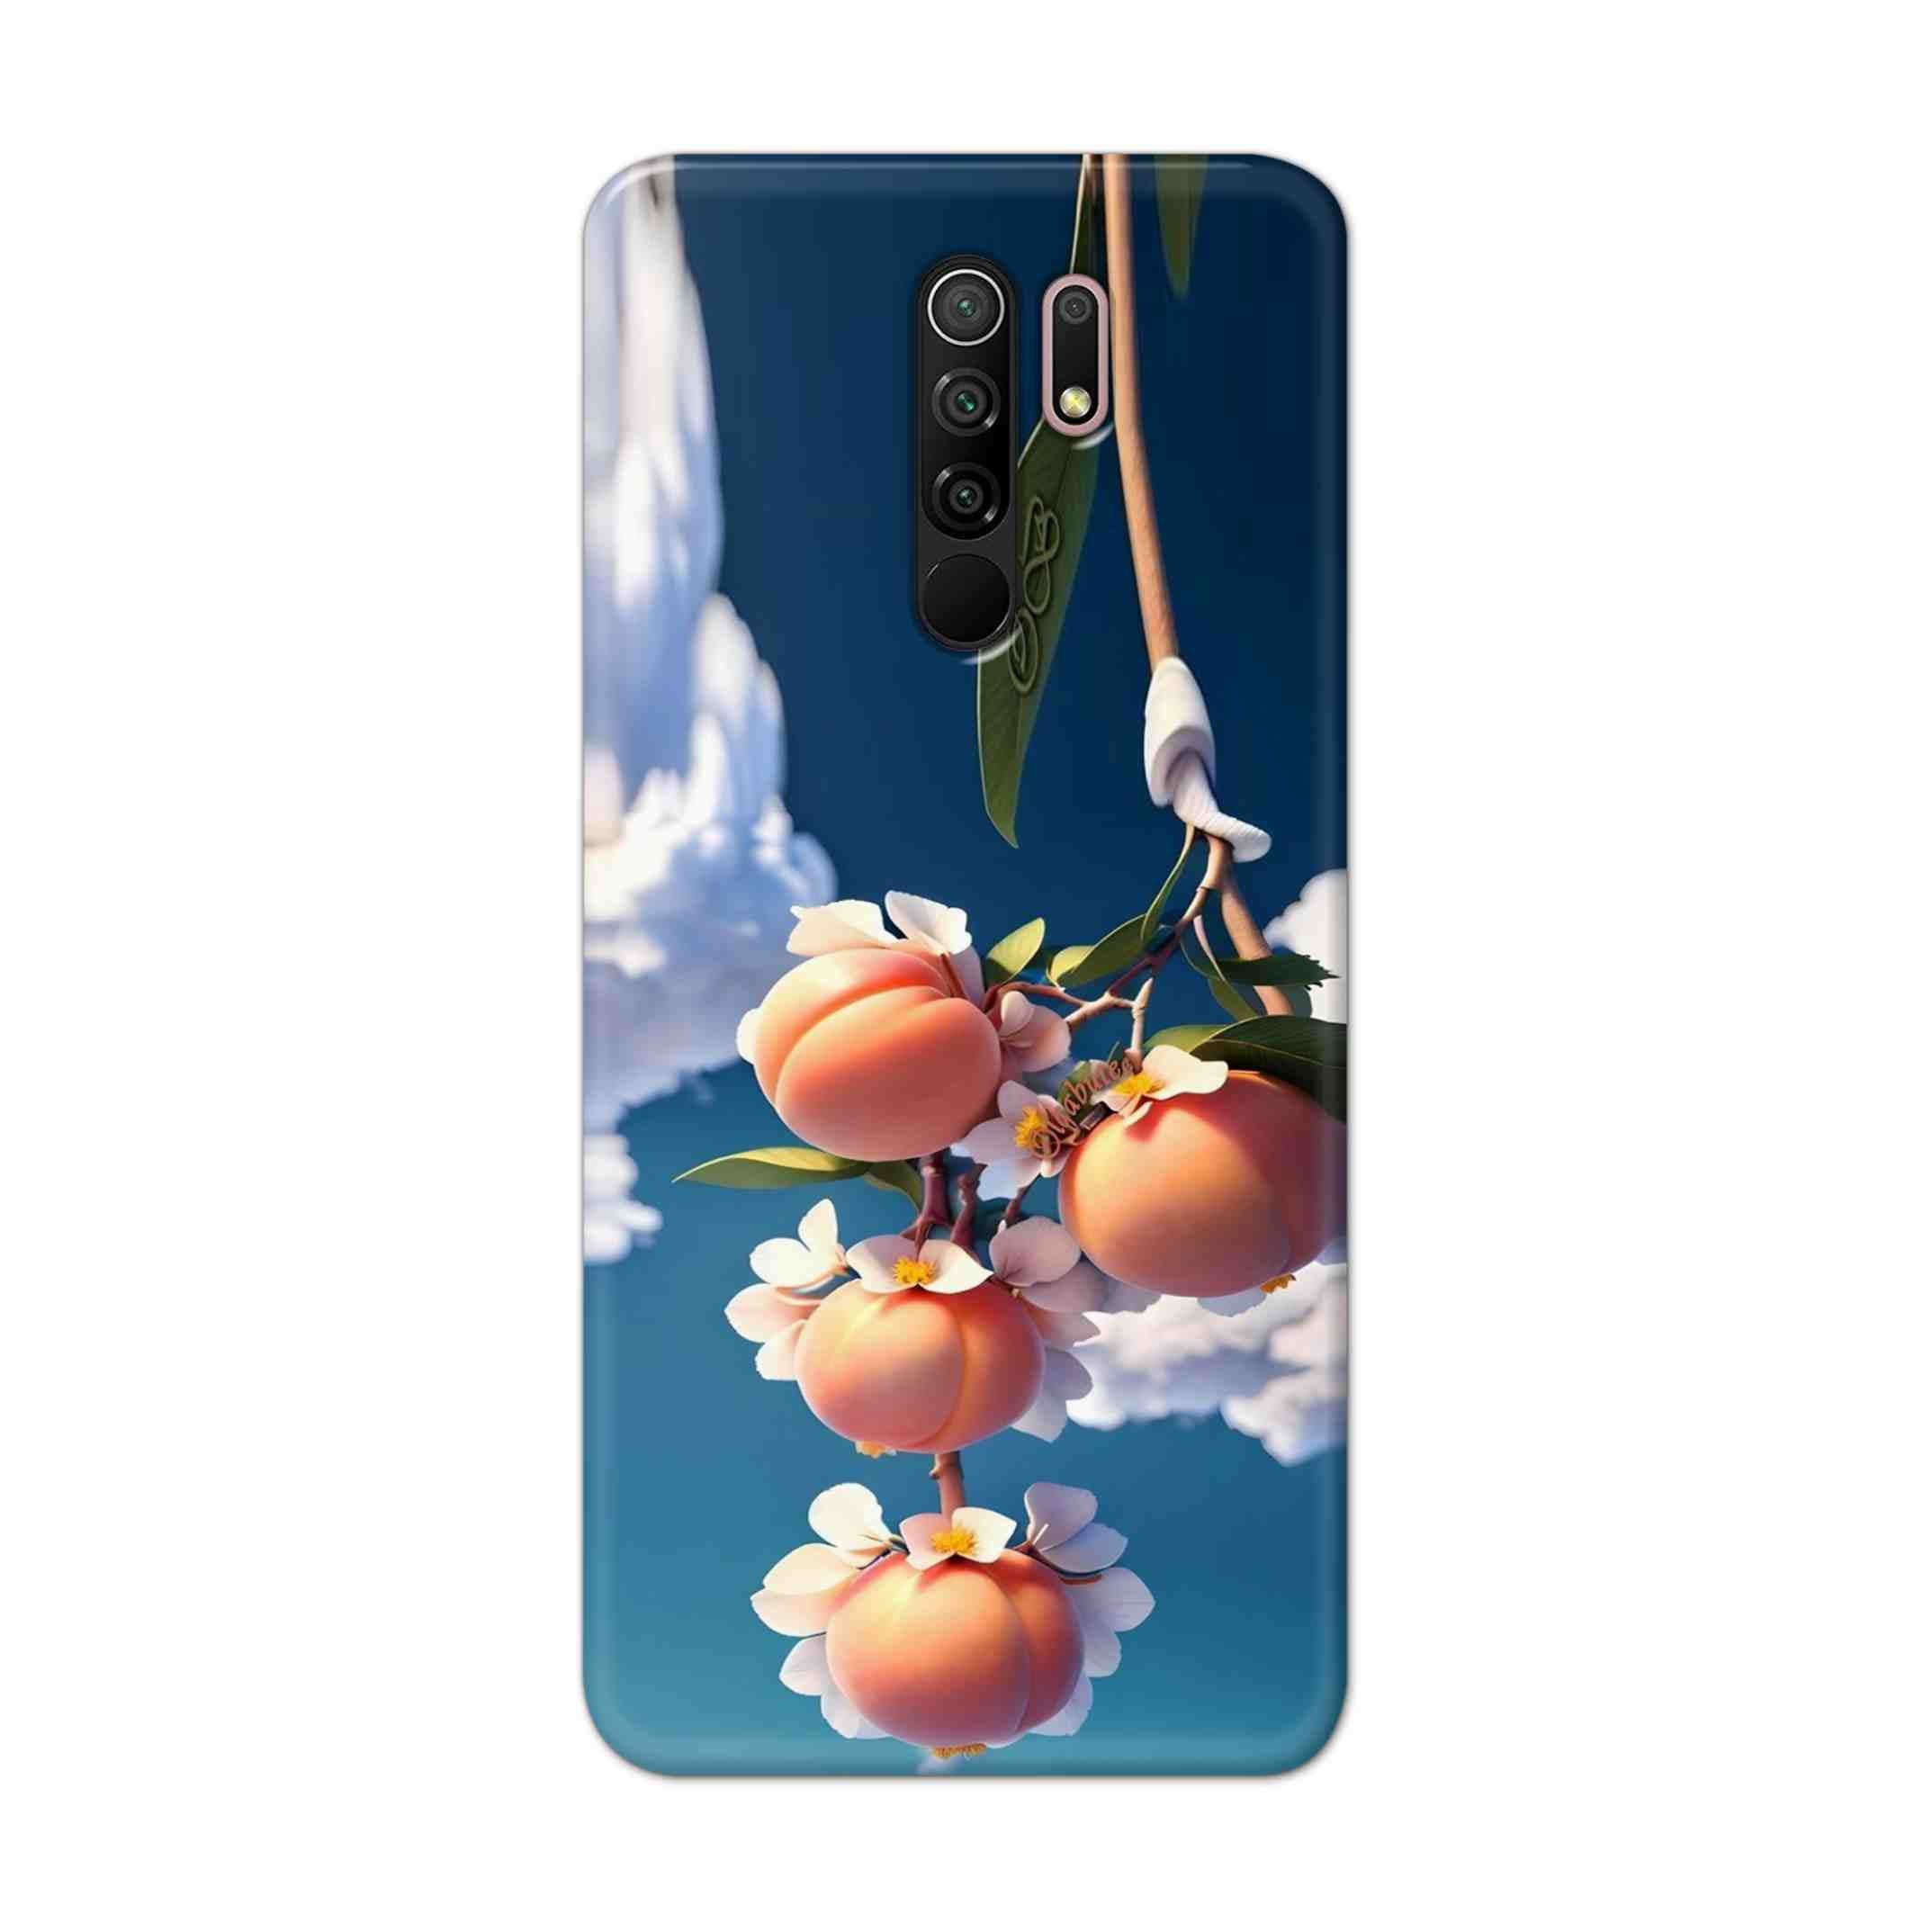 Buy Fruit Hard Back Mobile Phone Case Cover For Xiaomi Redmi 9 Prime Online